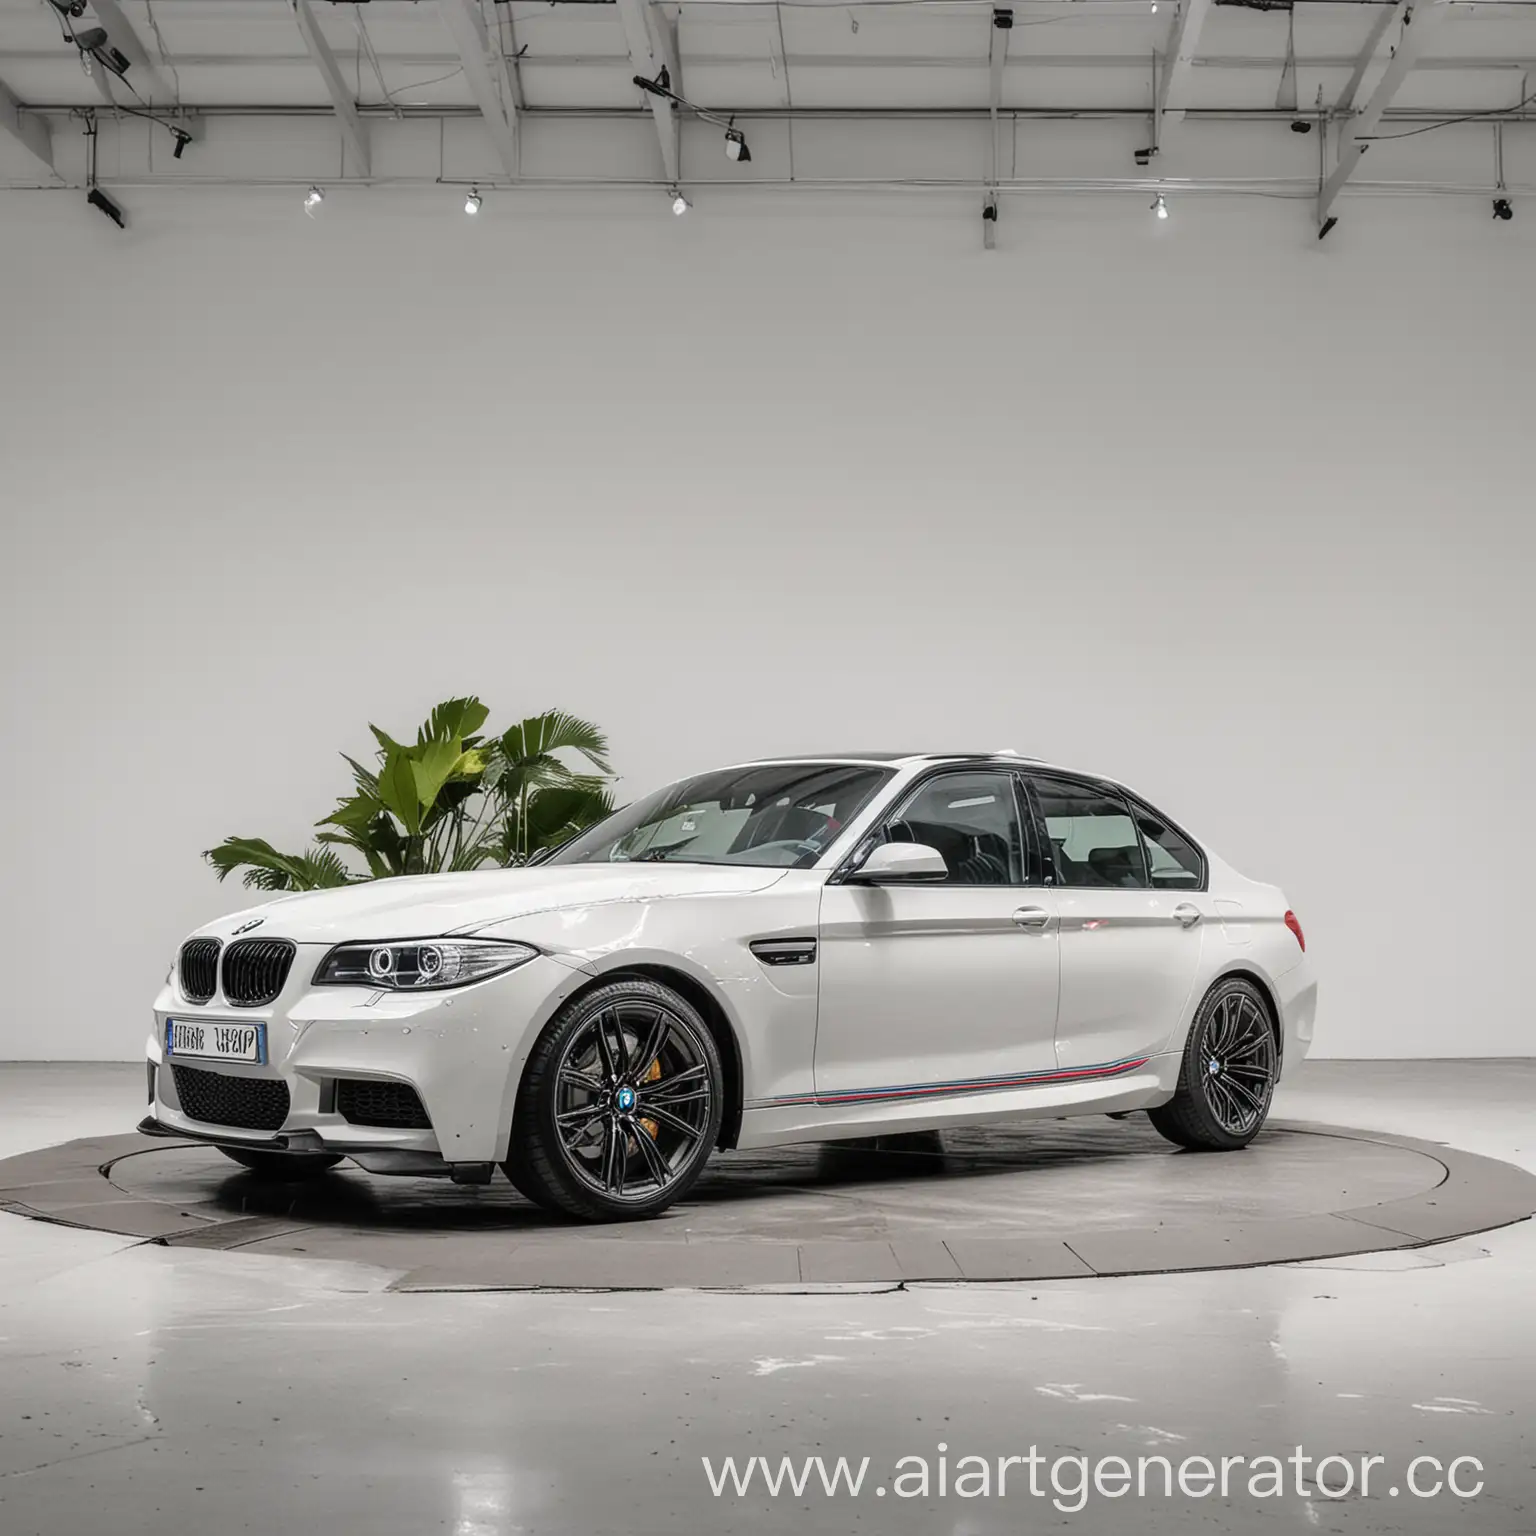 Luxury-BMW-Car-Displayed-in-Pavilion-against-Clean-White-Background